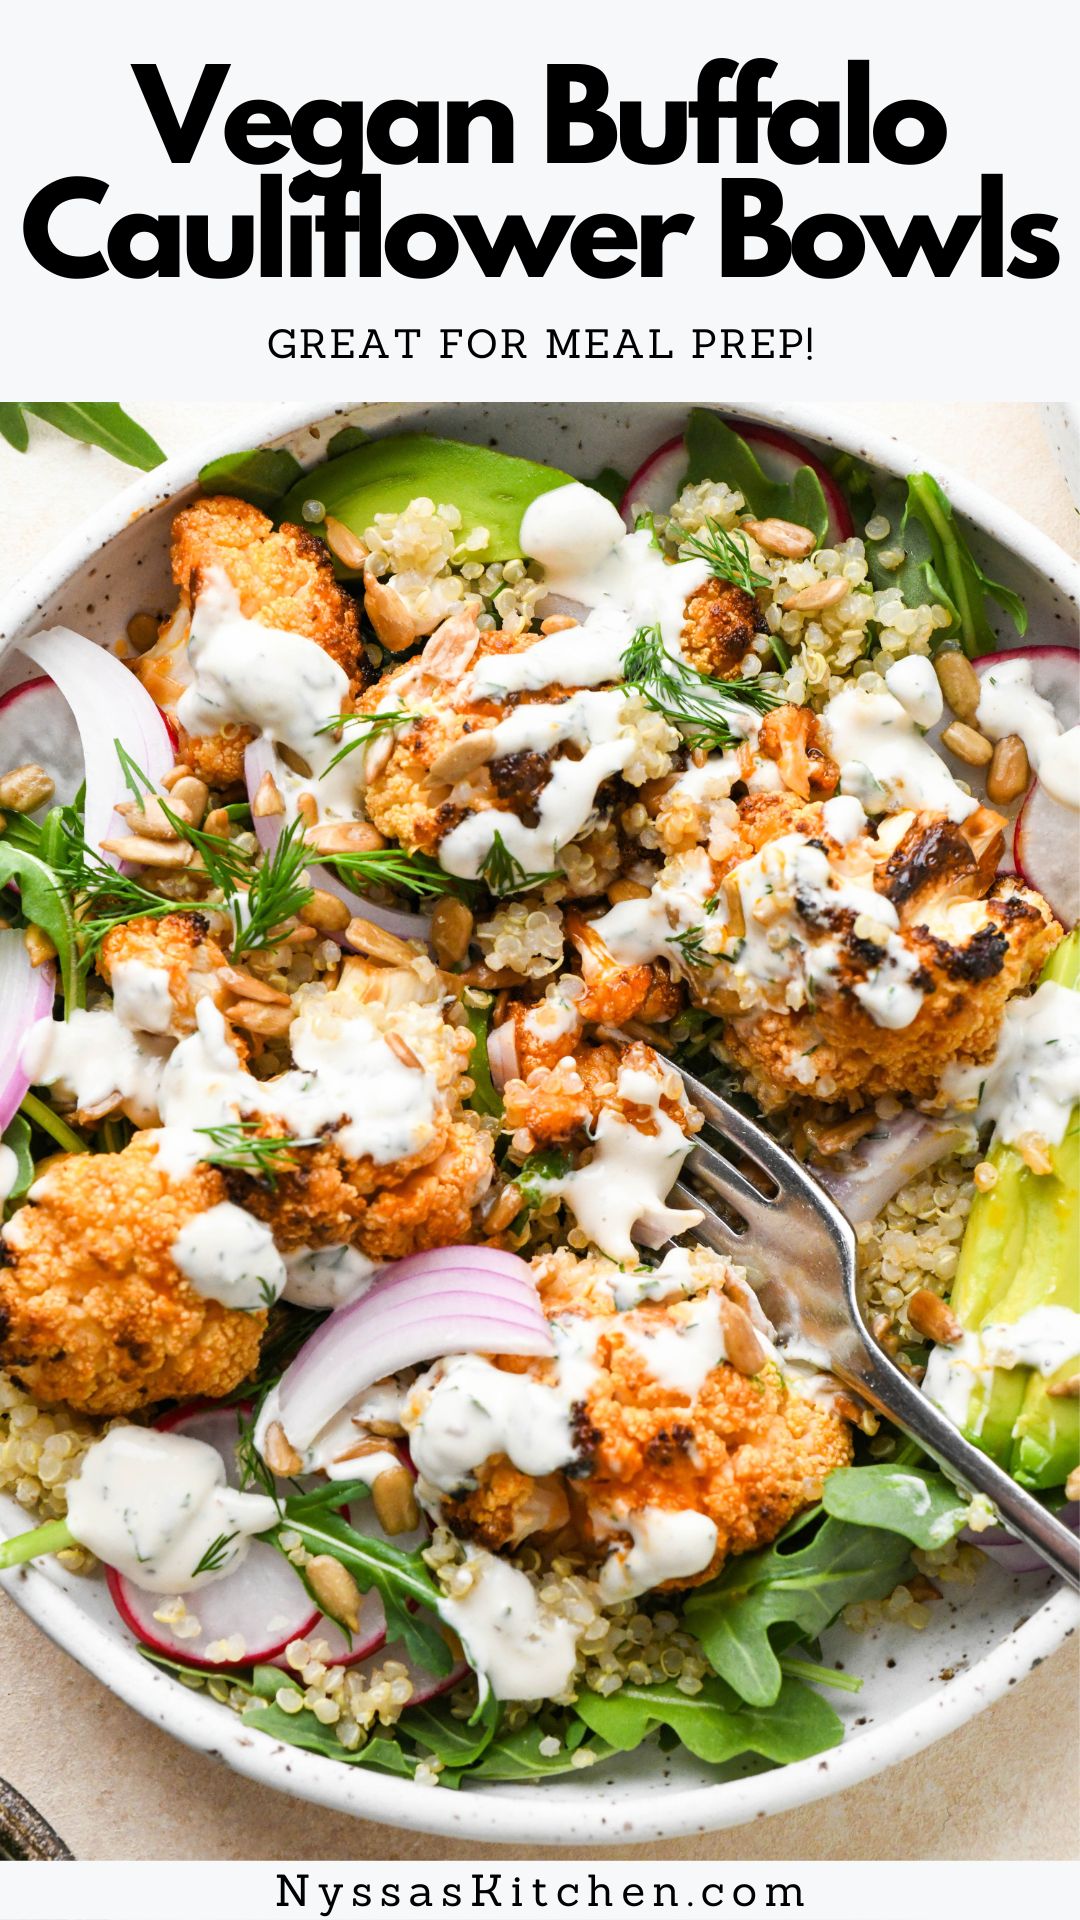 Vegan buffalo roasted cauliflower bowls are the meatless weeknight meal that you need! Made with hearty and healthy ingredients like arugula, quinoa, buffalo roasted cauliflower, avocado, radish, sunflower seeds, and an irresistible vegan ranch dressing. Vibrant, easy to make, and so delicious! Vegan, vegetarian, gluten free, dairy free.